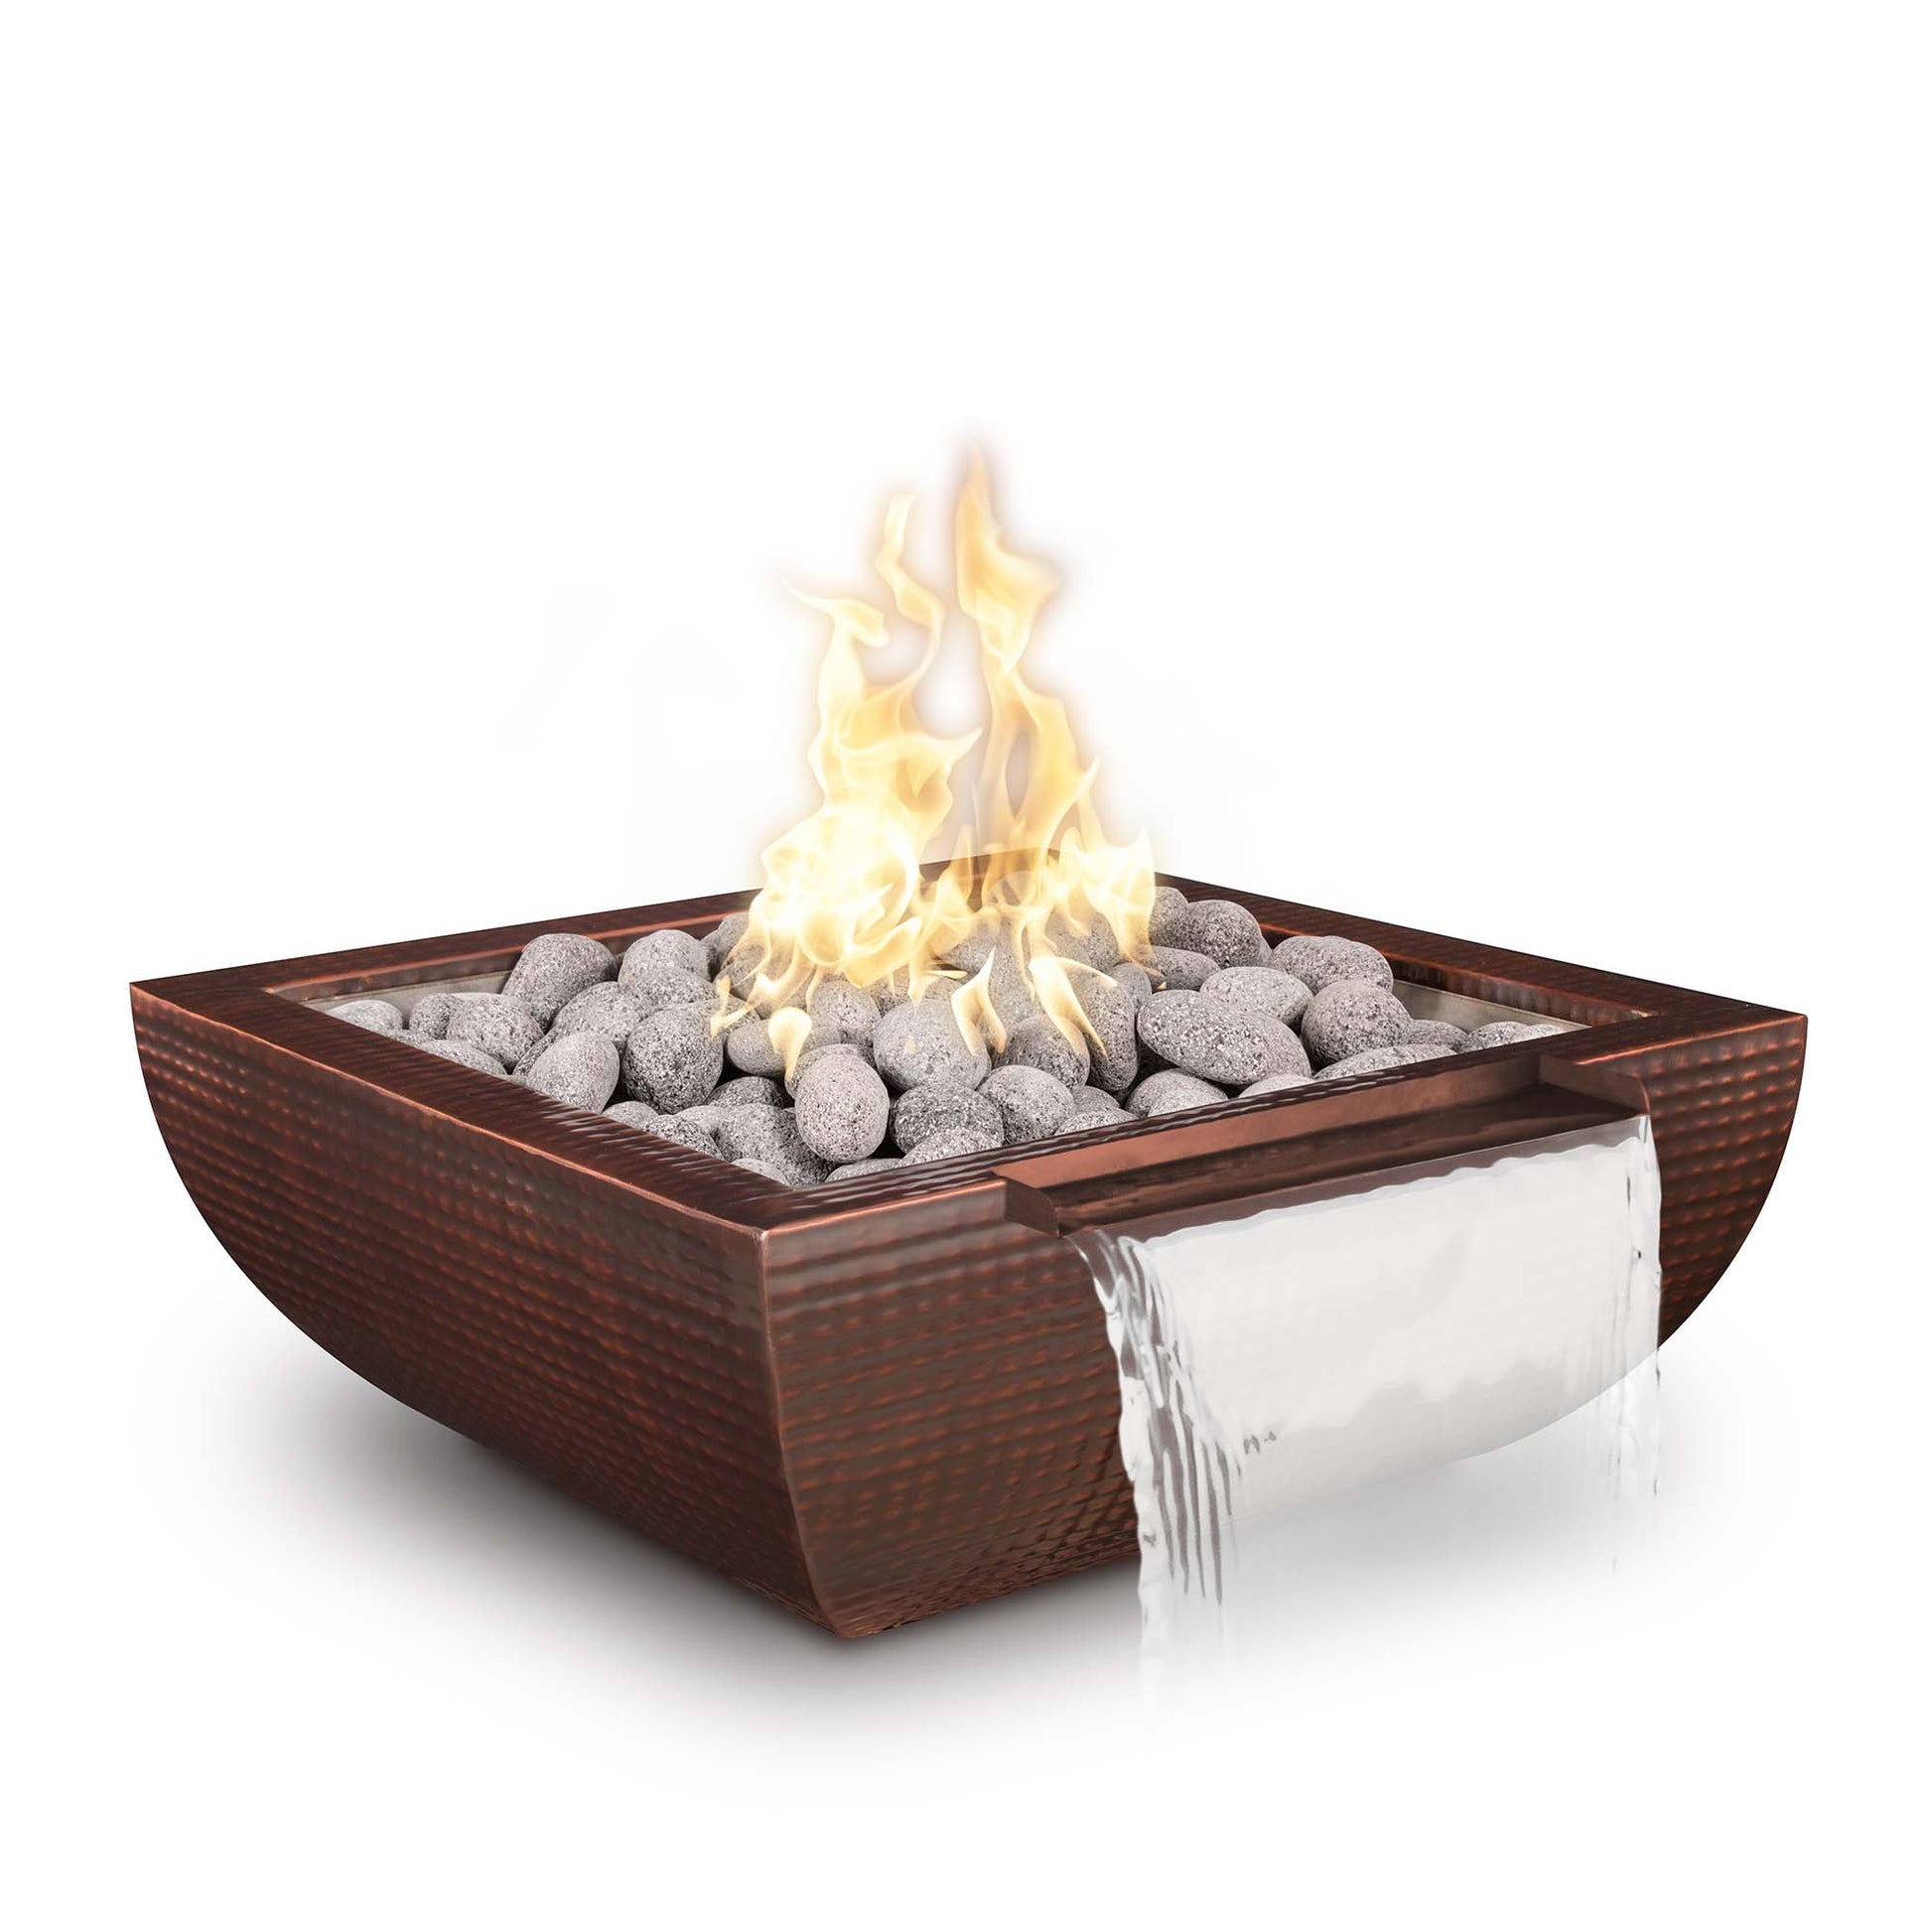 The Outdoor Plus Avalon Wide Spill 30" Java Powder Coated Metal Liquid Propane Fire & Water Bowl with Match Lit with Flame Sense Ignition